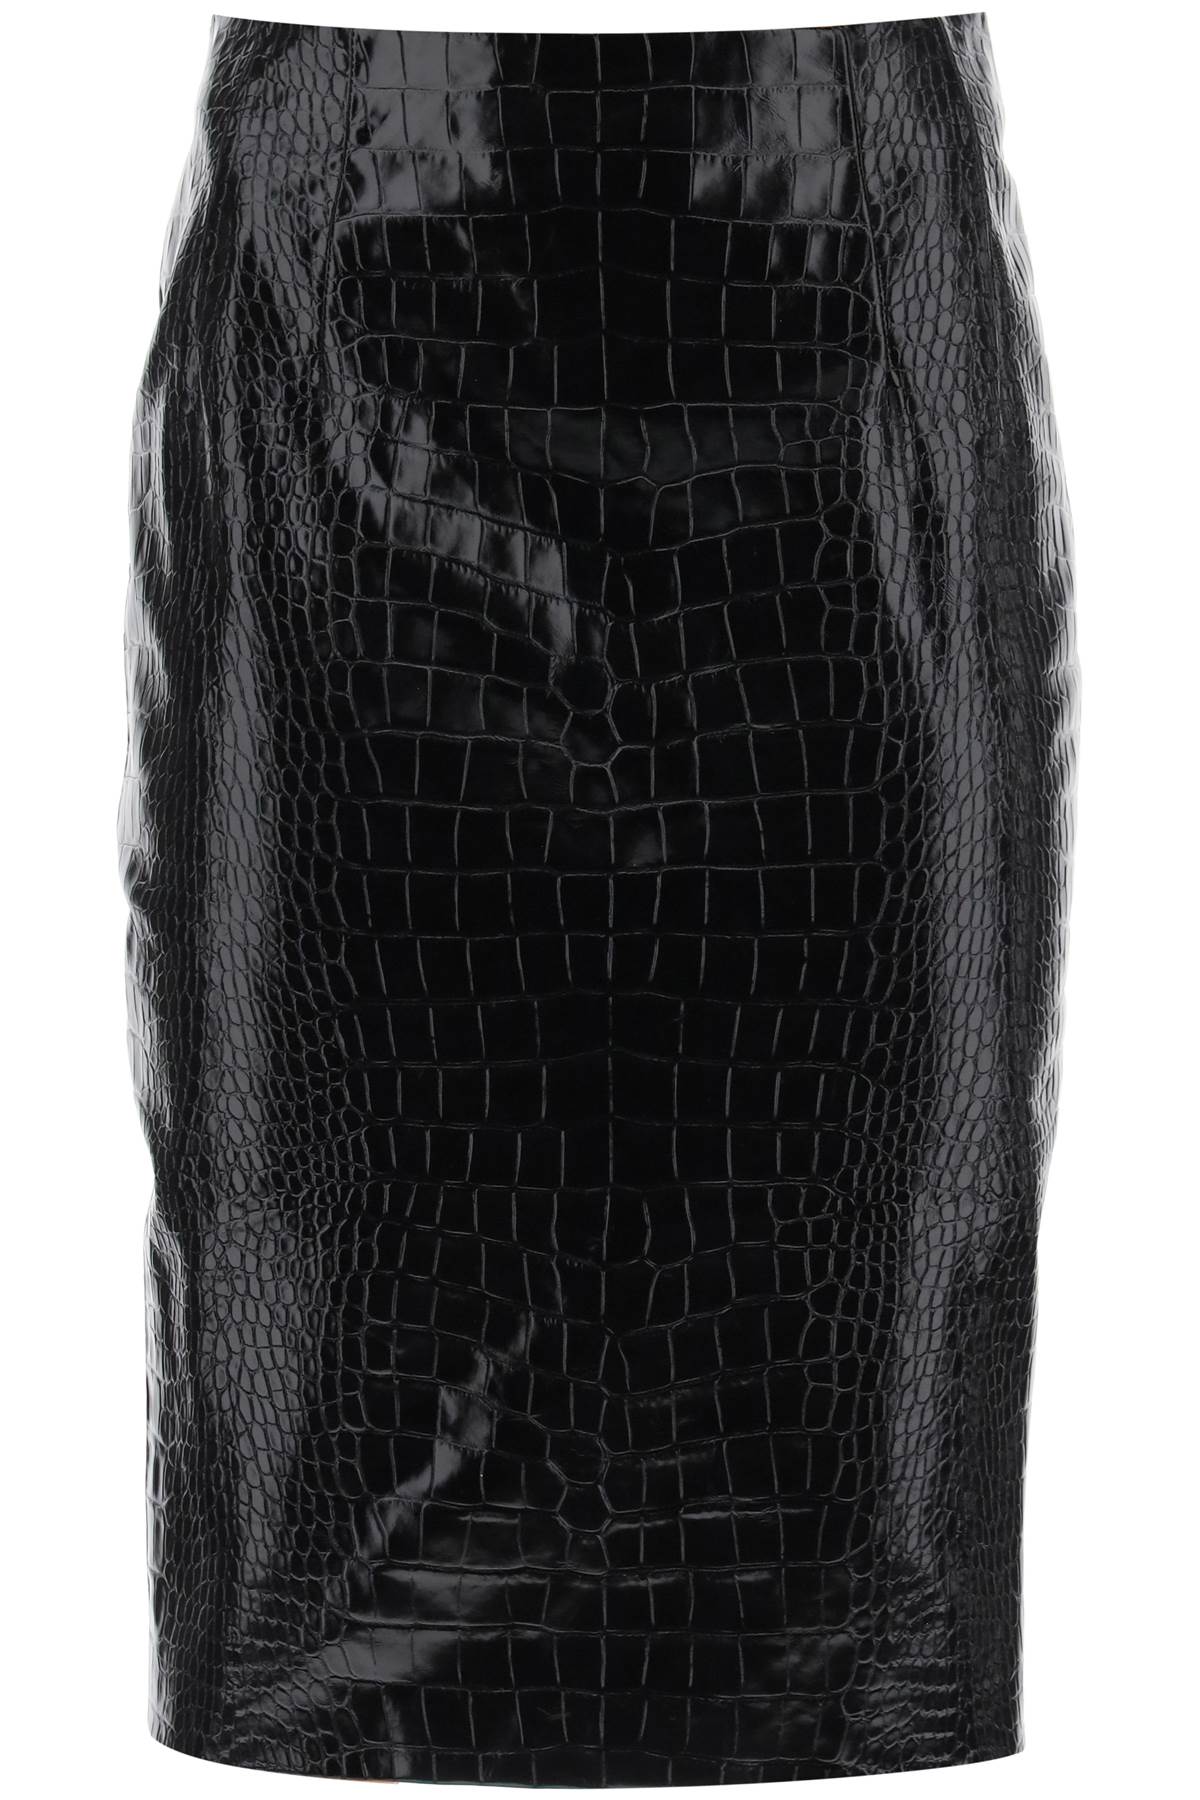 VERSACE Black Croco-Effect Leather Pencil Skirt for Women from FW23 Collection